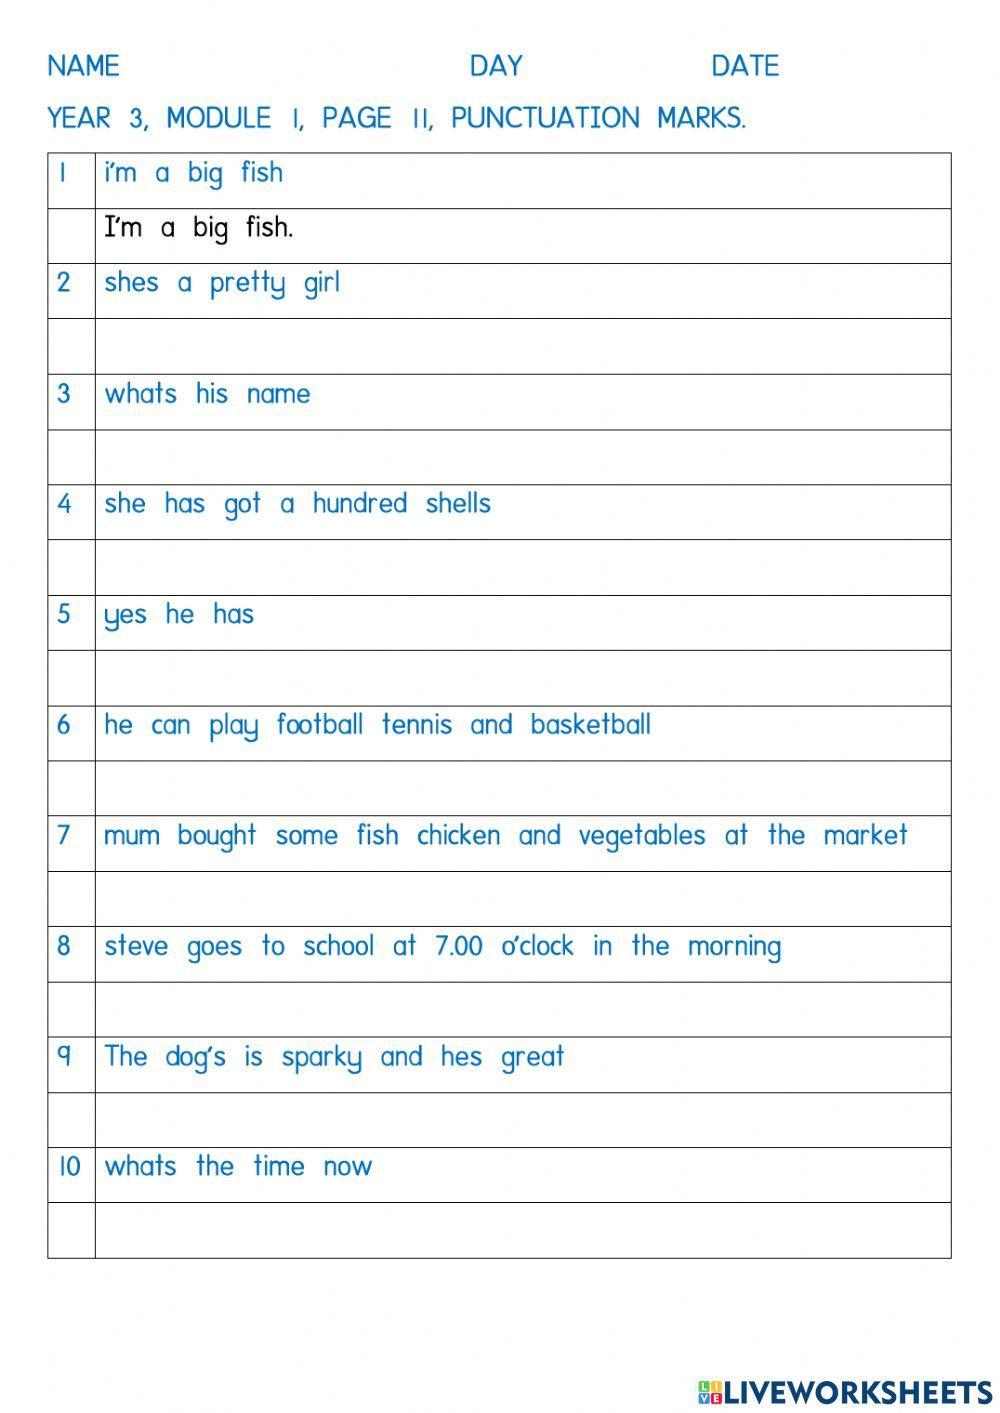 Year 3, module 1, punctuation marks